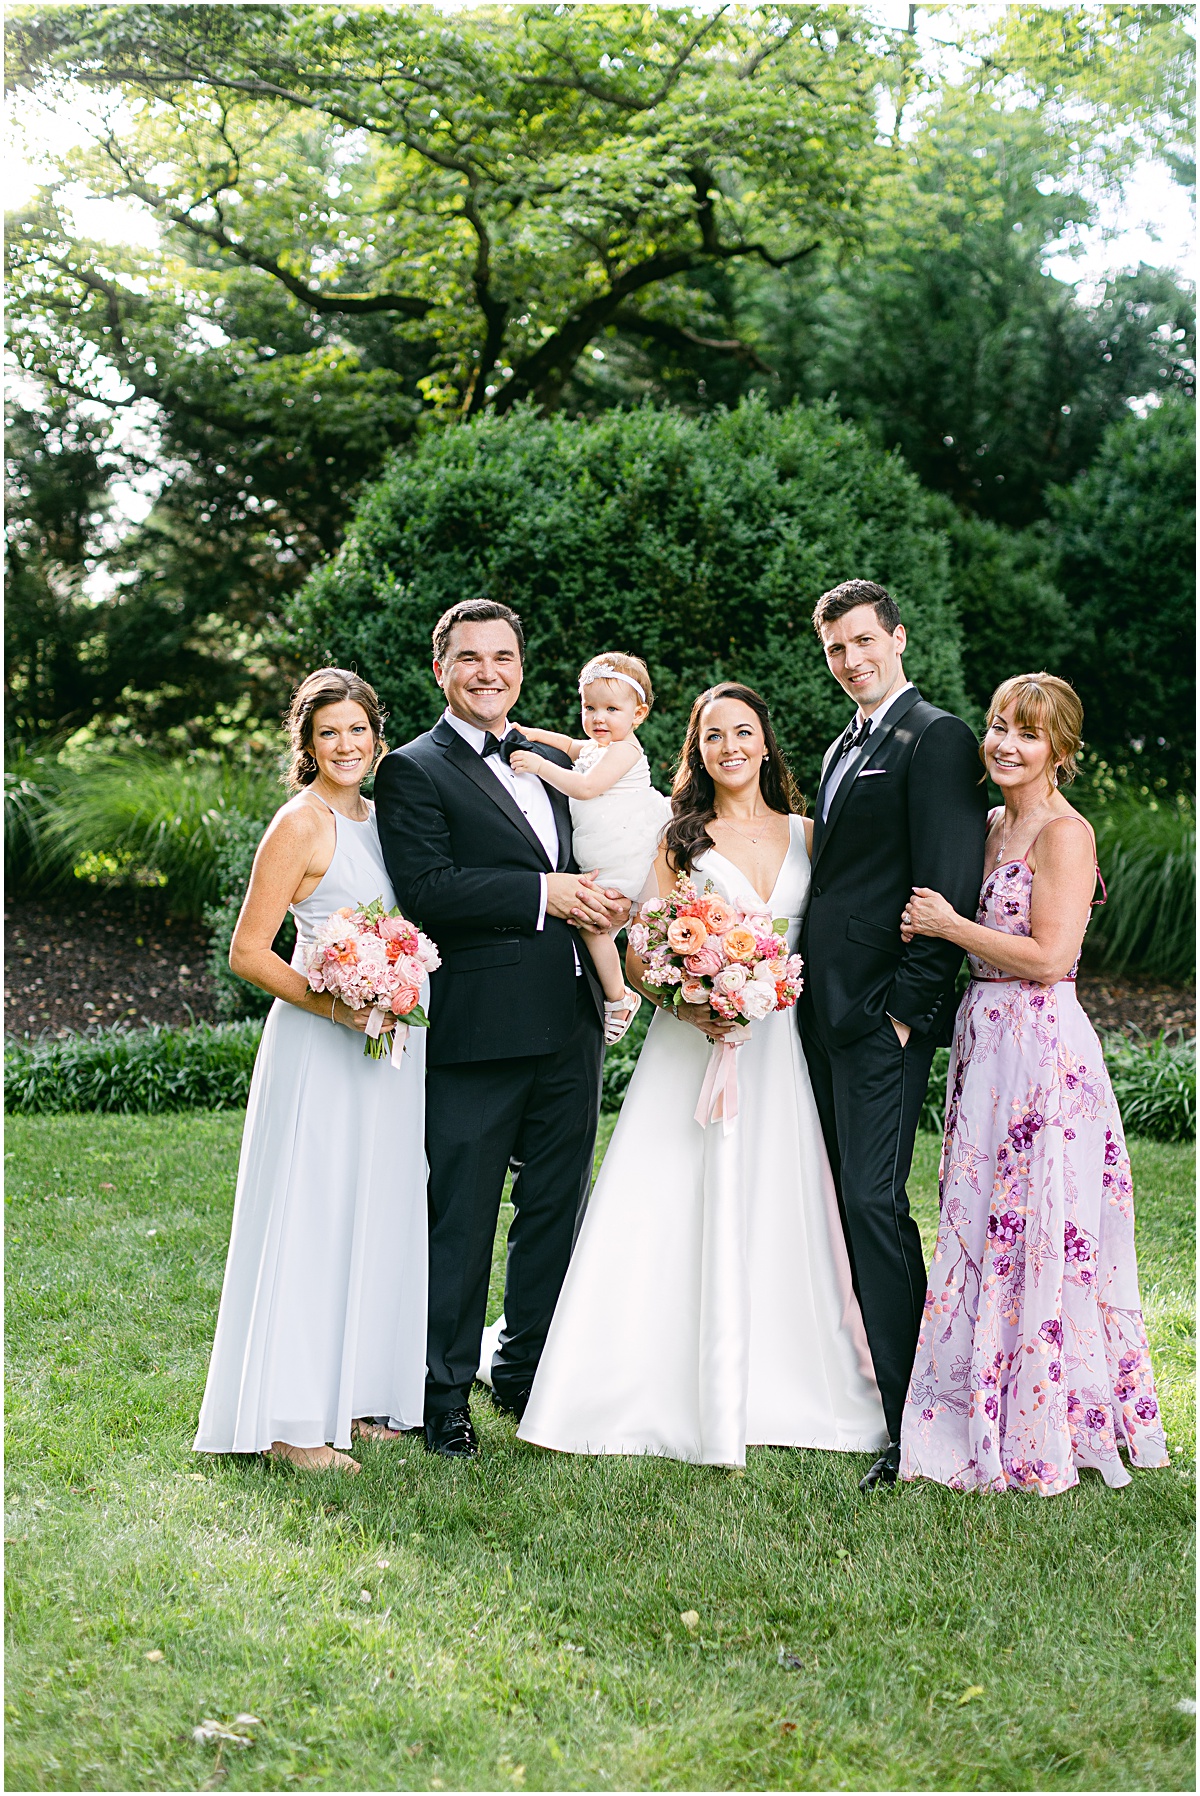 Family portraits. Joyful summer wedding at the Inn at Willow Grove by Sarah Bradshaw. Planning by Kelley Cannon Events.